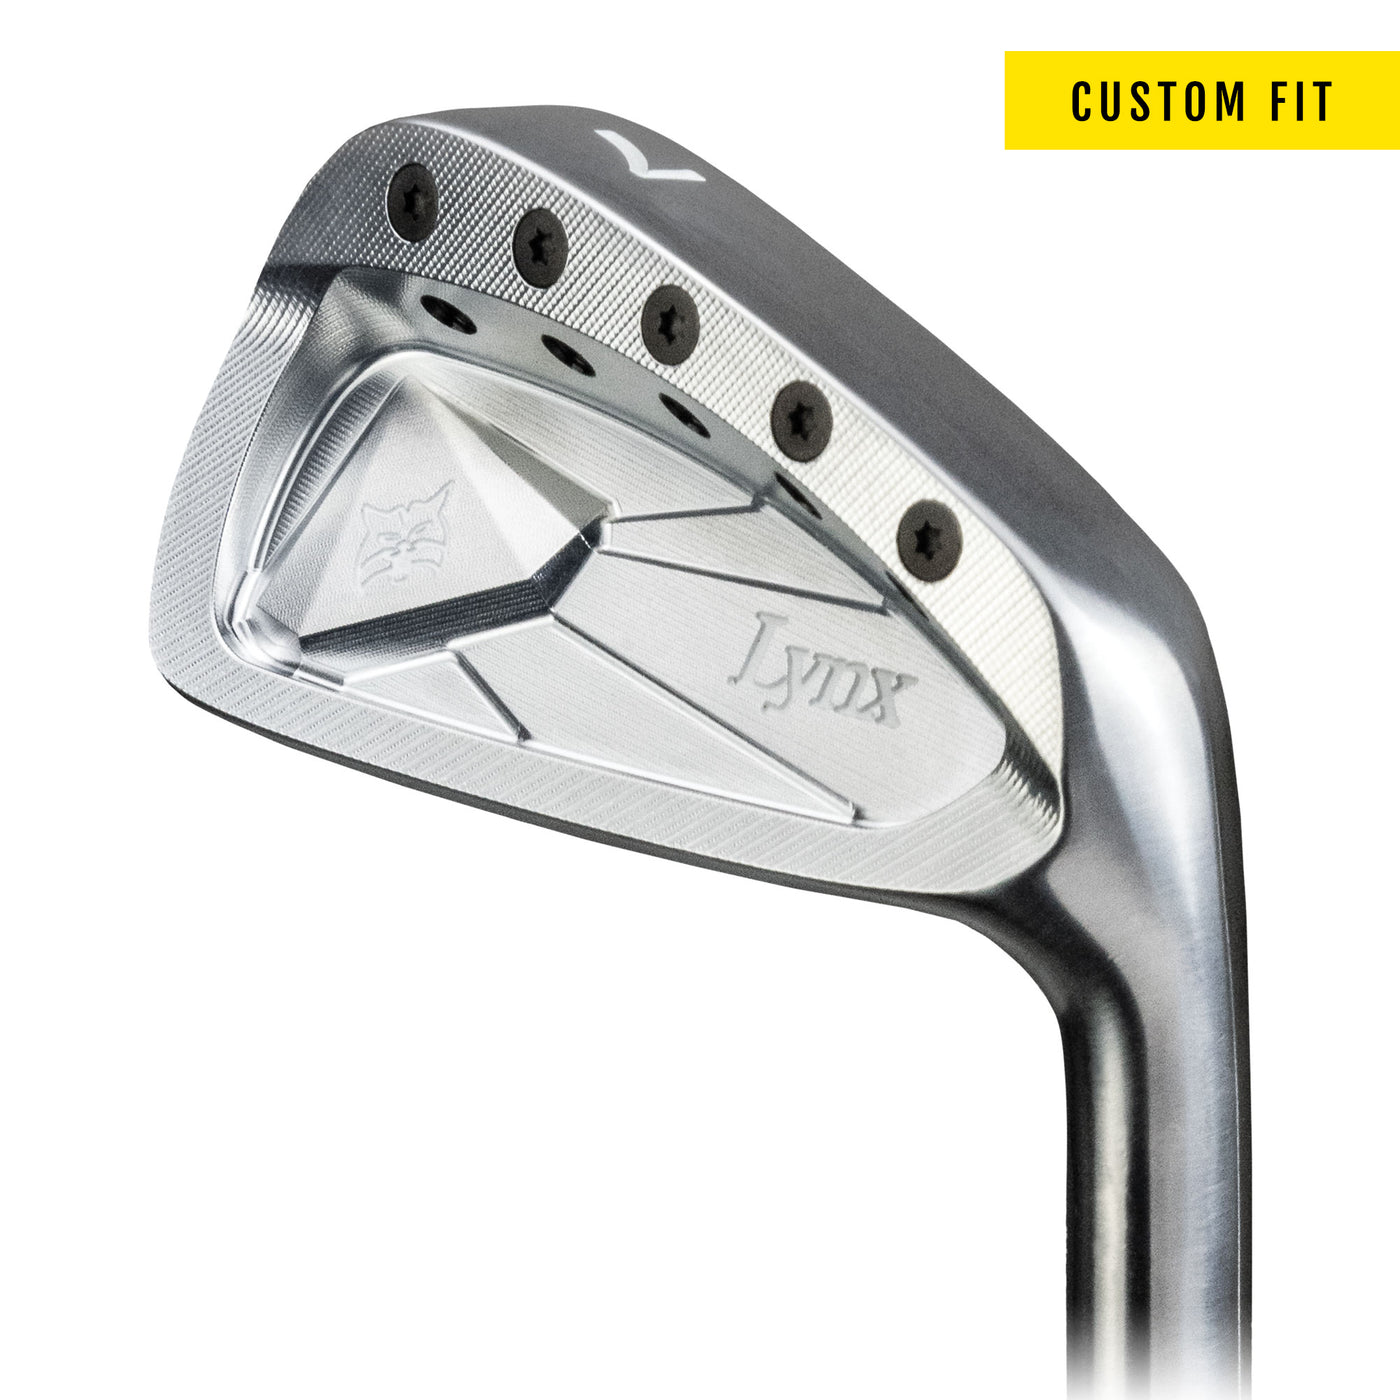 Custom Prowler® Forged Irons